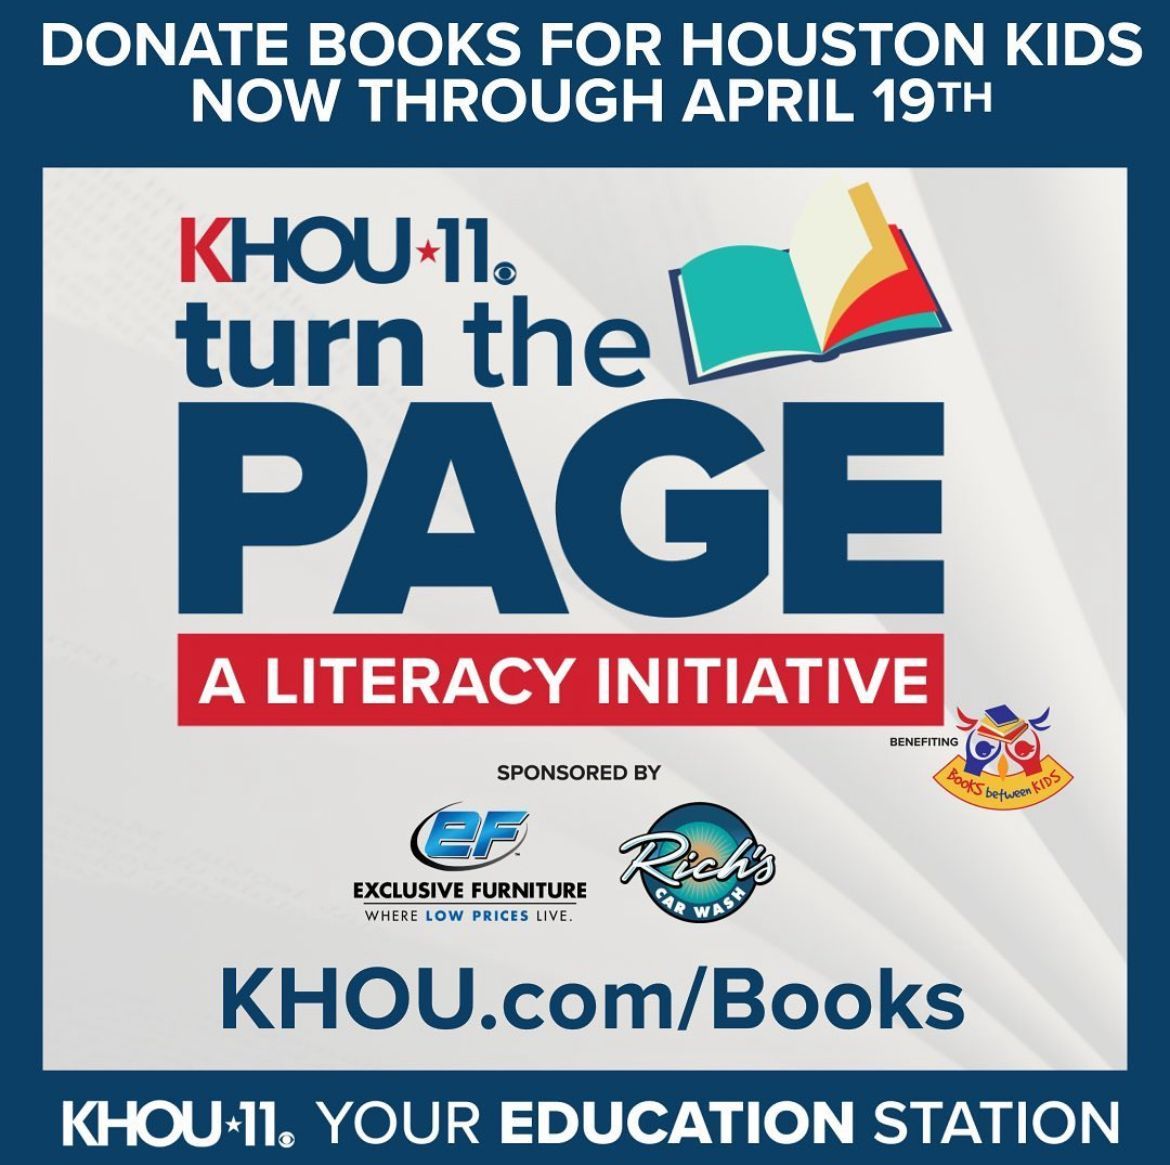 📣 The @KHOU Turn the Page Book Drive, benefitting @BooksBtnKids, is happening now! Stop by the bookshop through April 19 to drop off new & gently used books for elementary-aged readers. You can also purchase books to donate or make a monetary donation! khou.com/article/news/e…